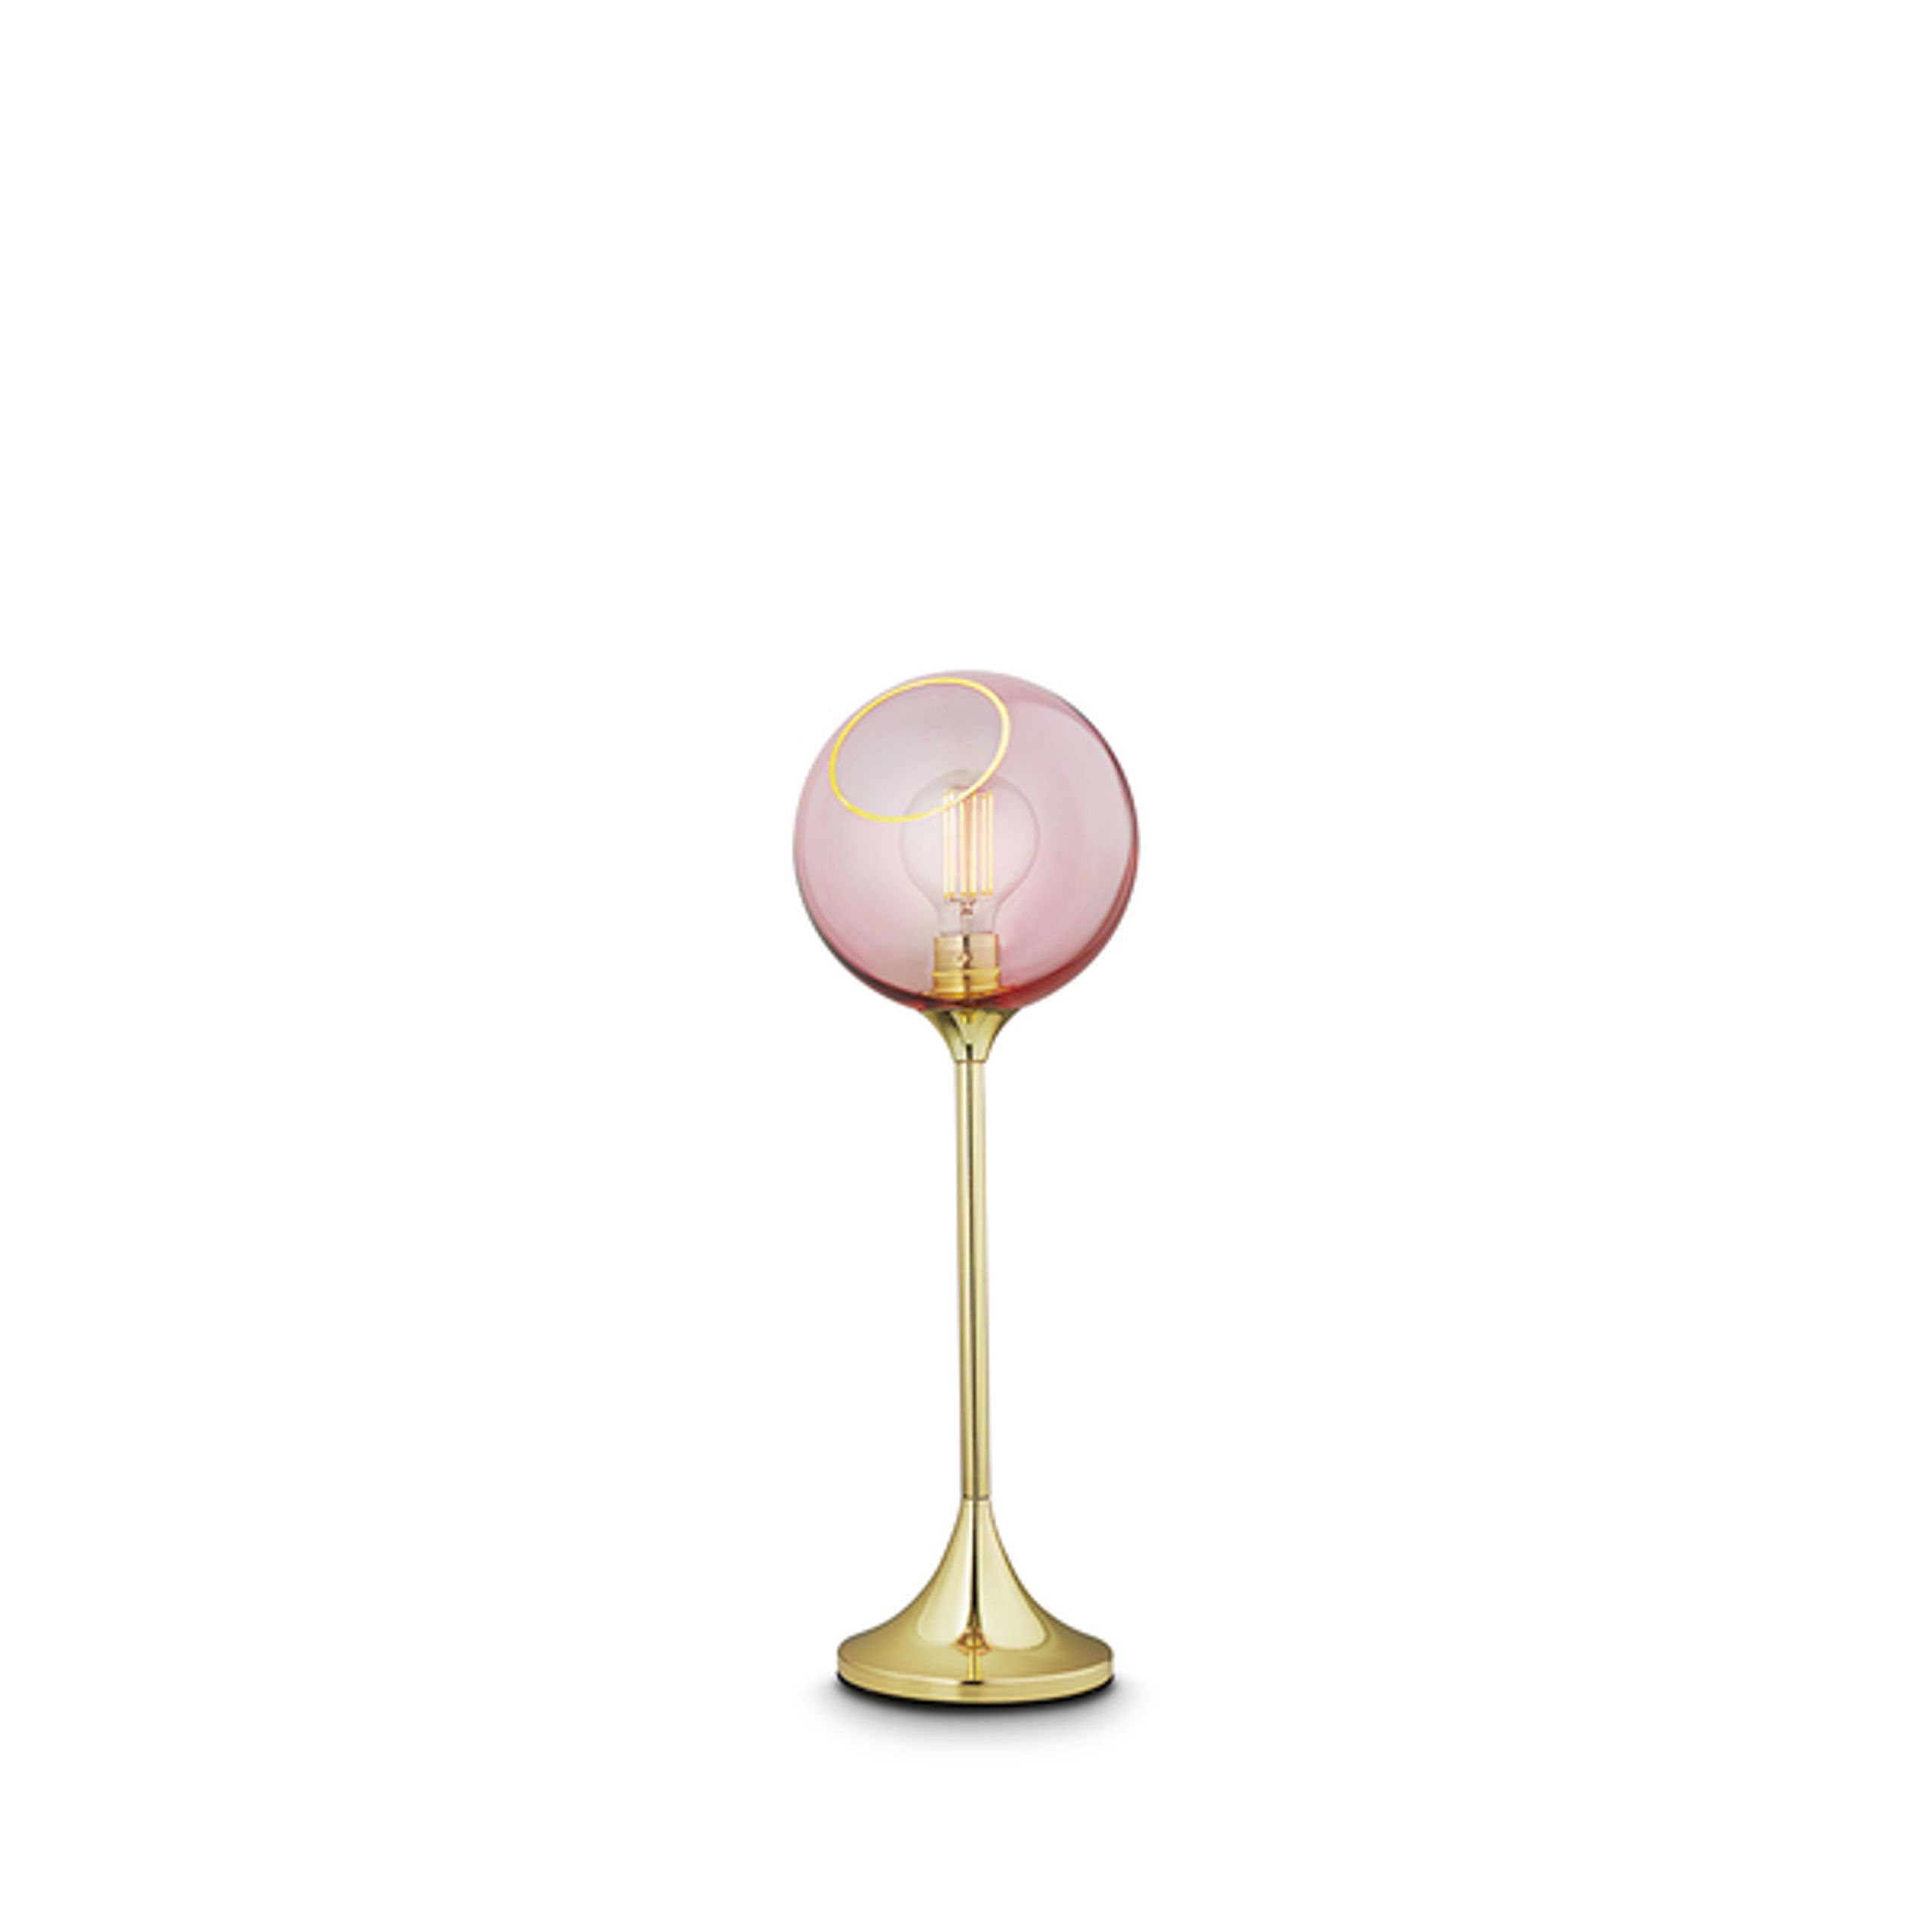 Design By Us - Lampe de table - Ballroom Table Lamp - Rose/Gold